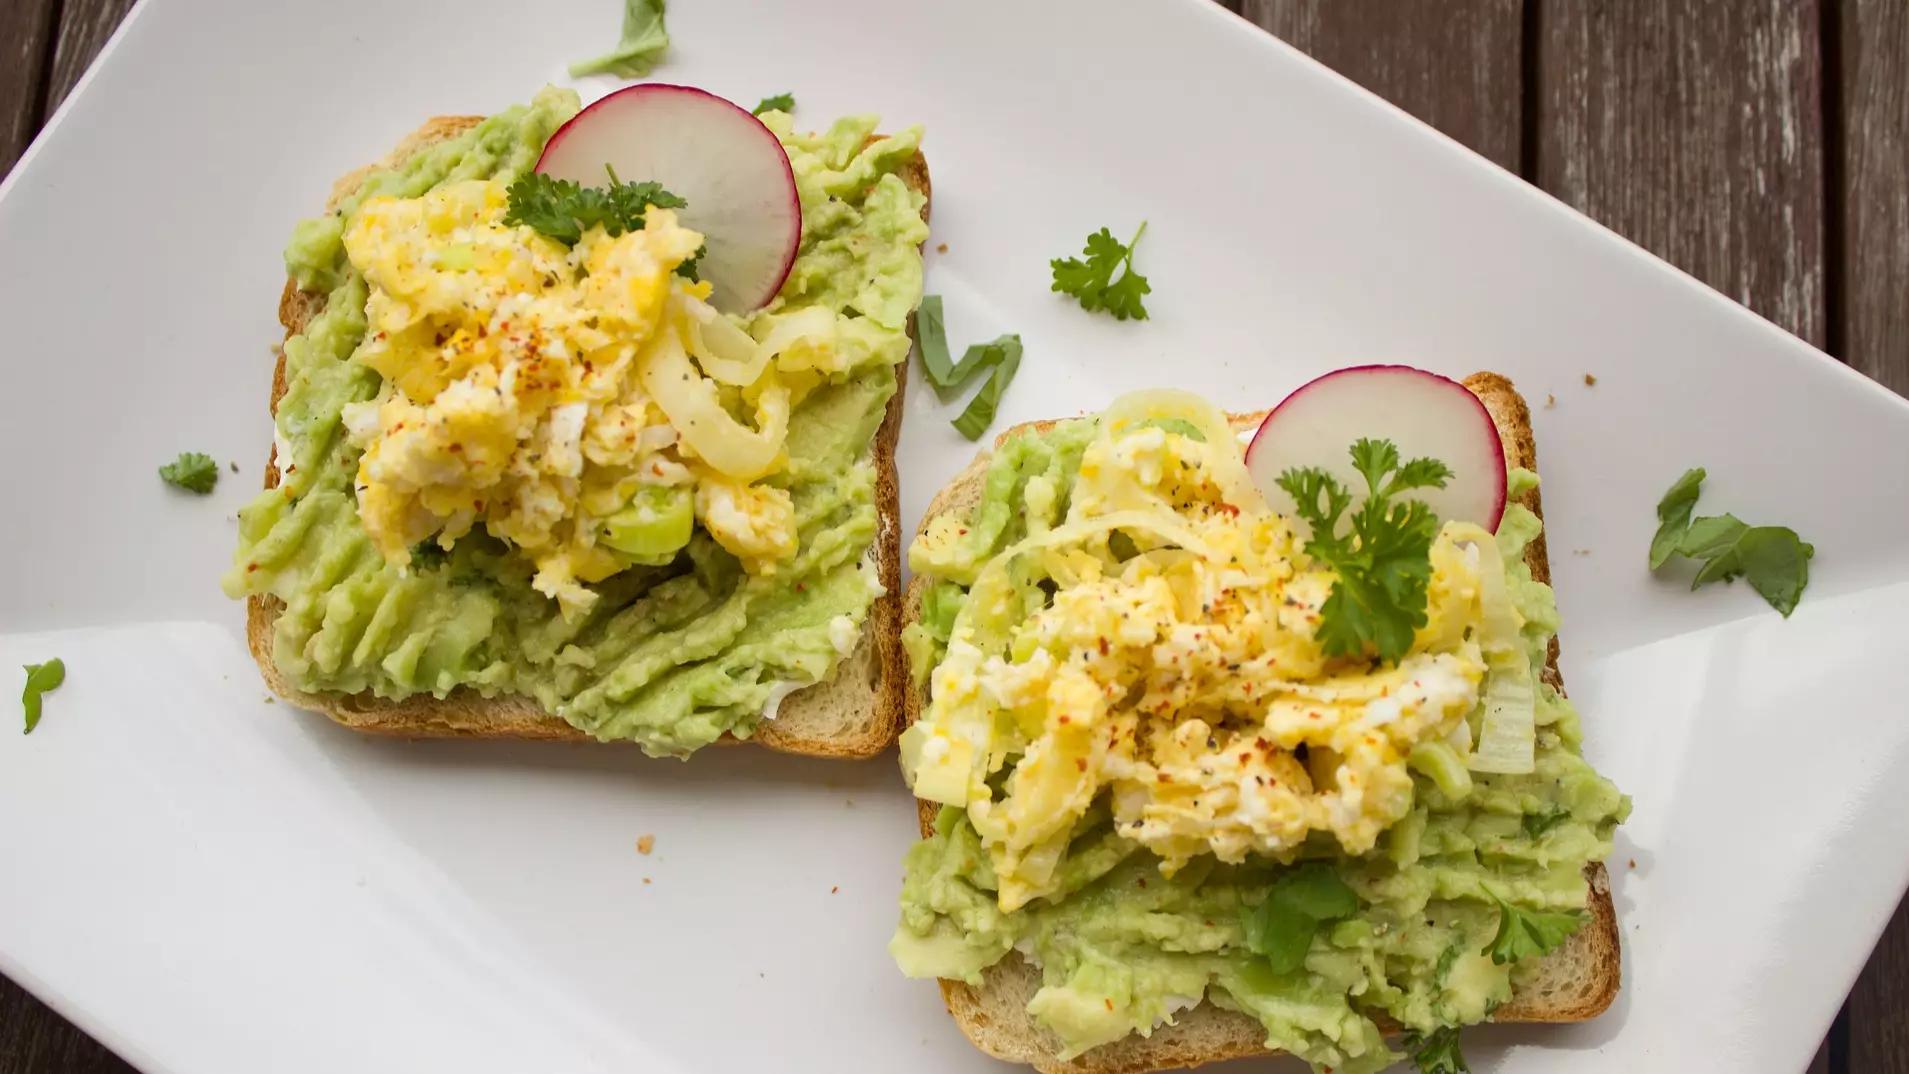 This Smashed Avocado Hack Proves You've Been Making It All Wrong